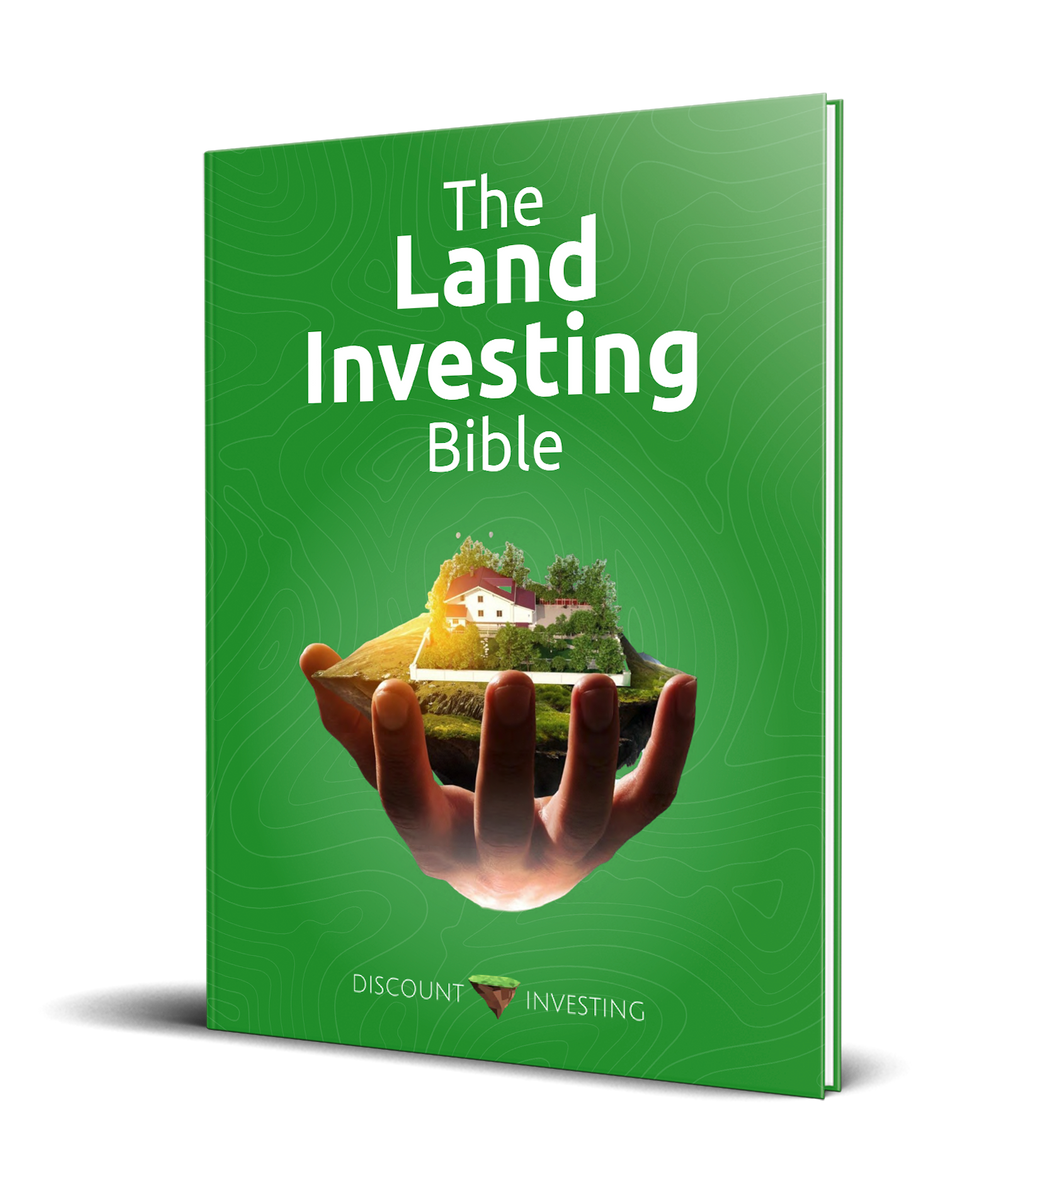 The Land Investing Bible